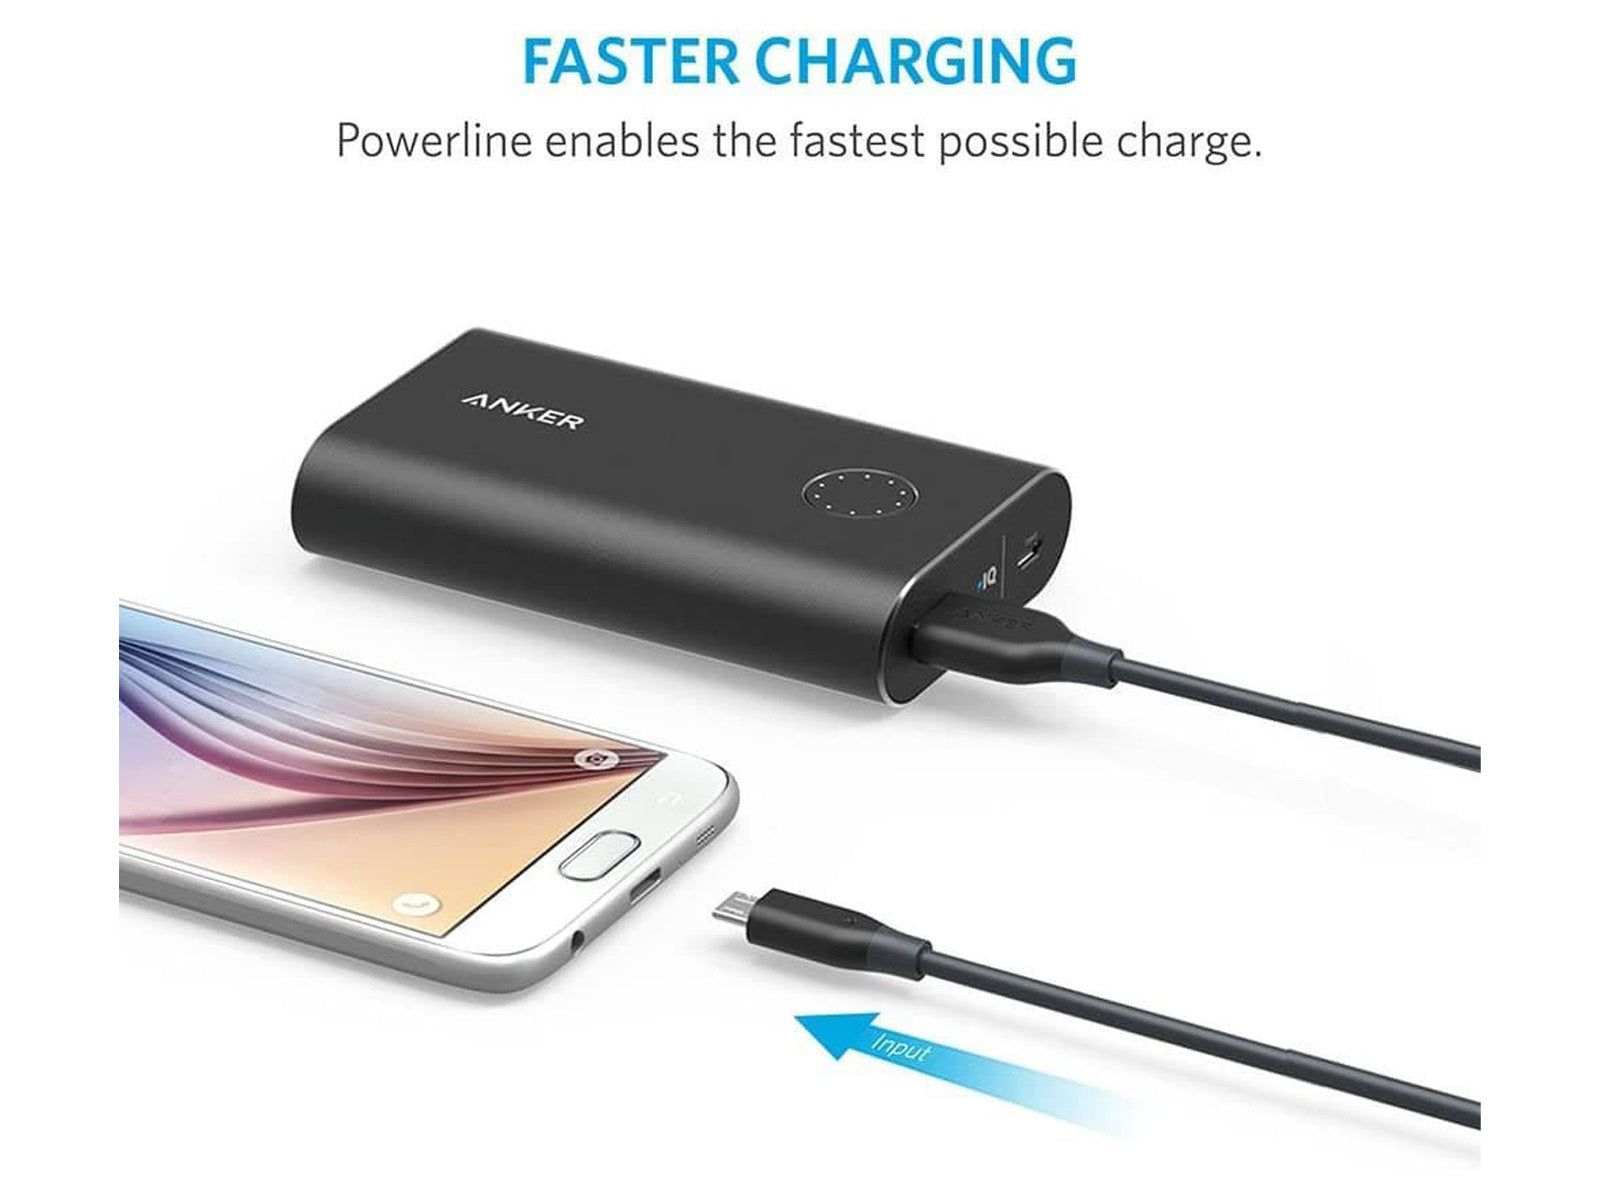 Image displays the fast charging feature of the PowerLine Select Micro USB High-Speed Charging Cable 